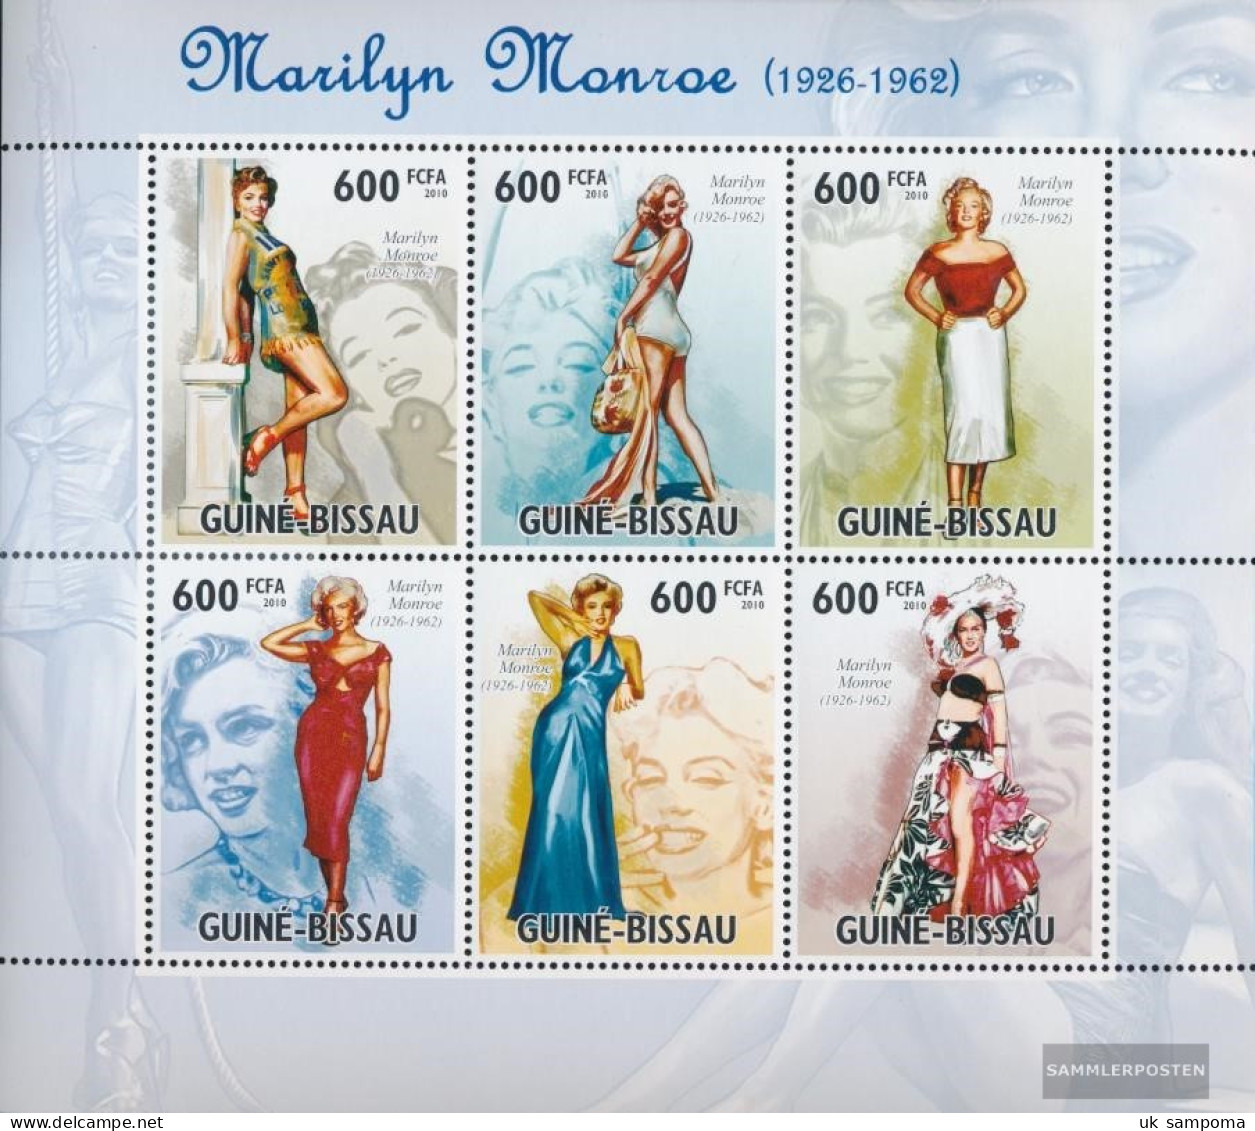 Guinea-Bissau 4849-4854 Sheetlet (complete. Issue) Unmounted Mint / Never Hinged 2010 Marilyn Monroe (1926-1962) - Guinea-Bissau